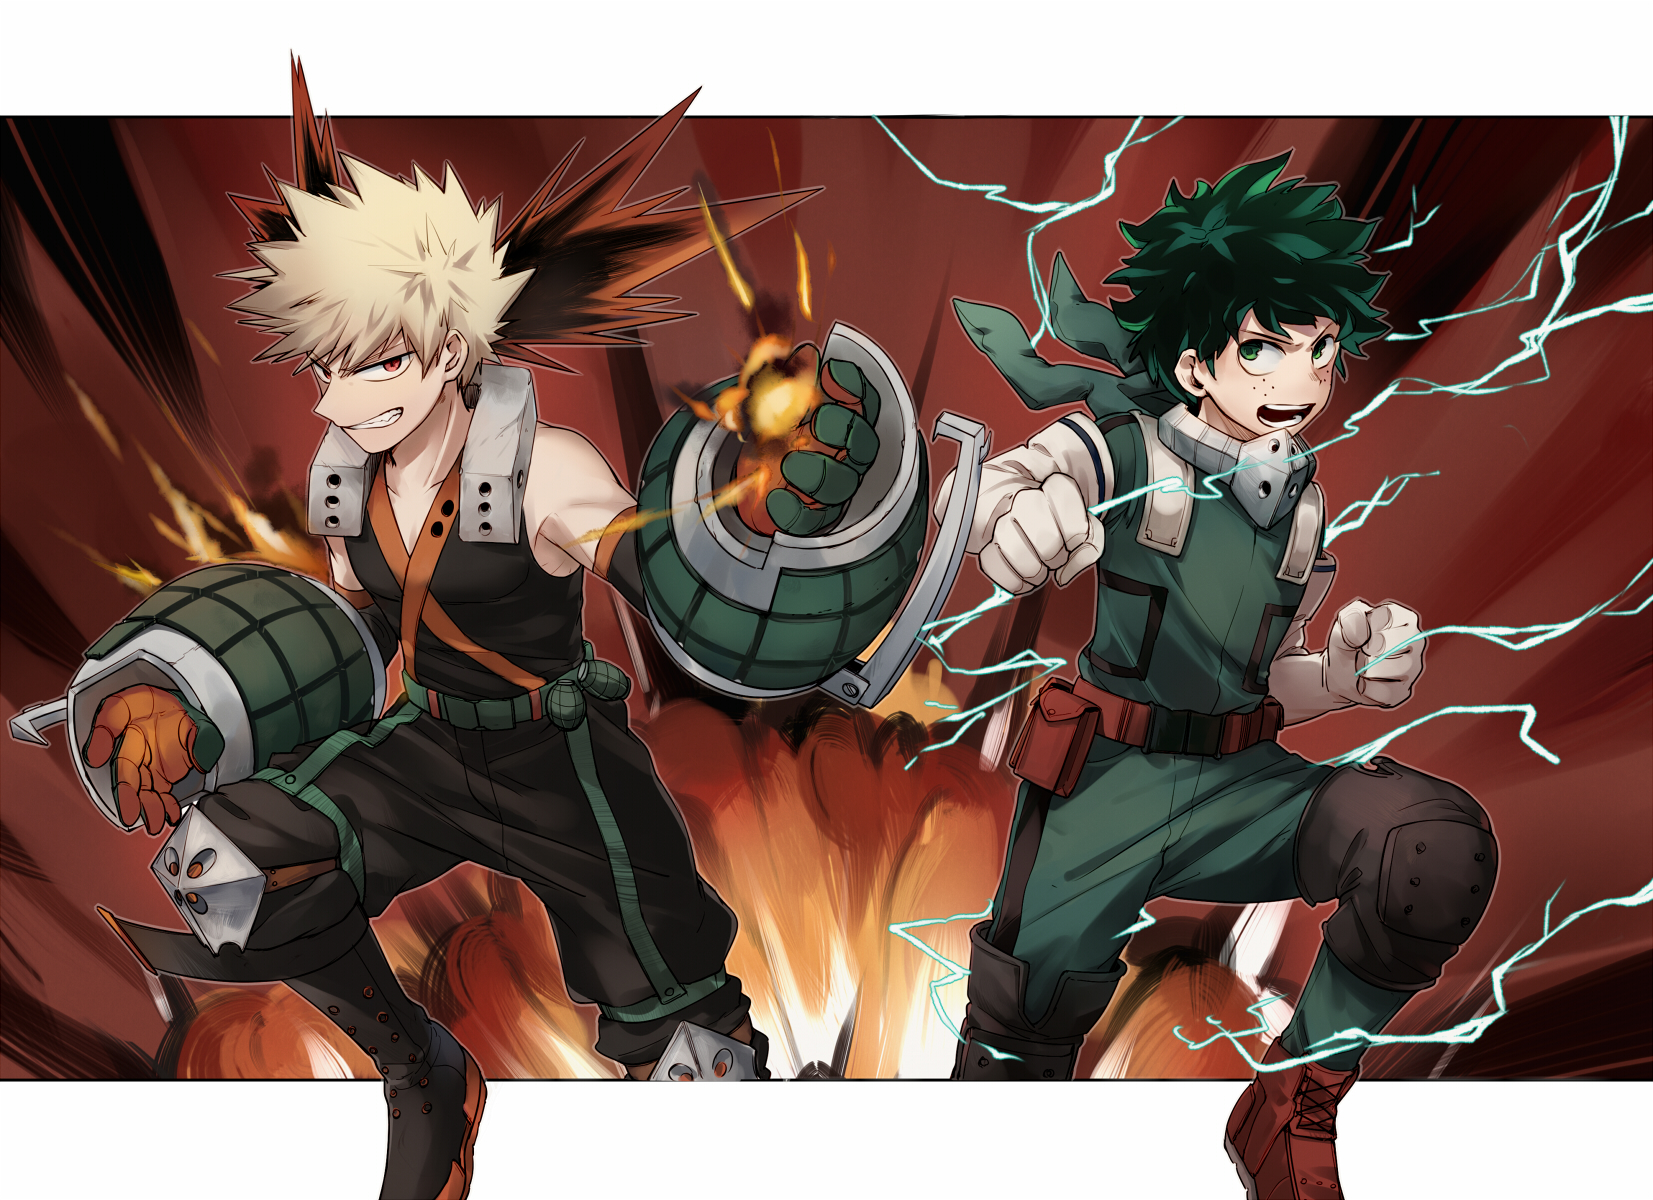 View, Download, Rate, and Comment on this My Hero Academia Image. image,ima...